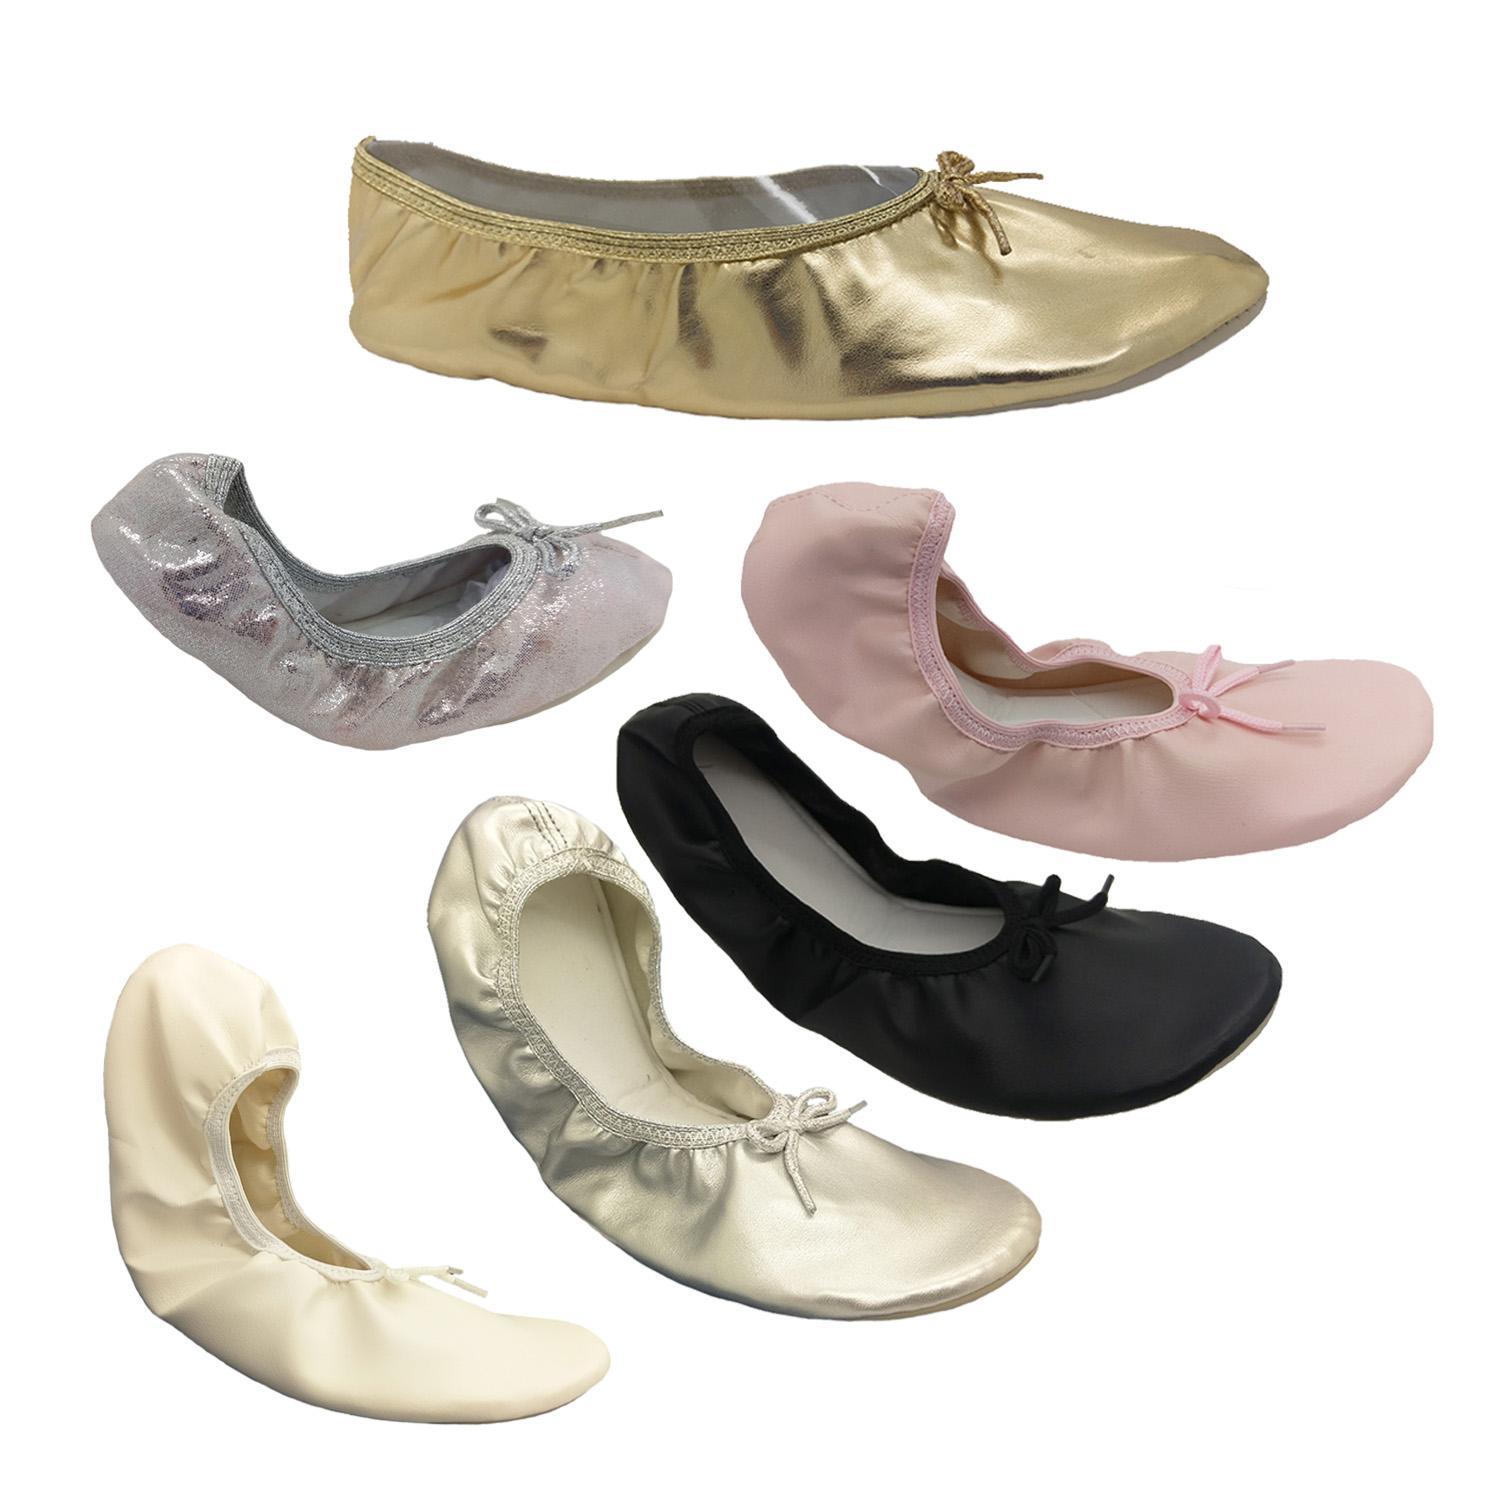 Girls Genuine Jiffies Classic Ballet Flats Elastic Edge Soft Insole Size 5 - 3-Silver Distressed-11-12